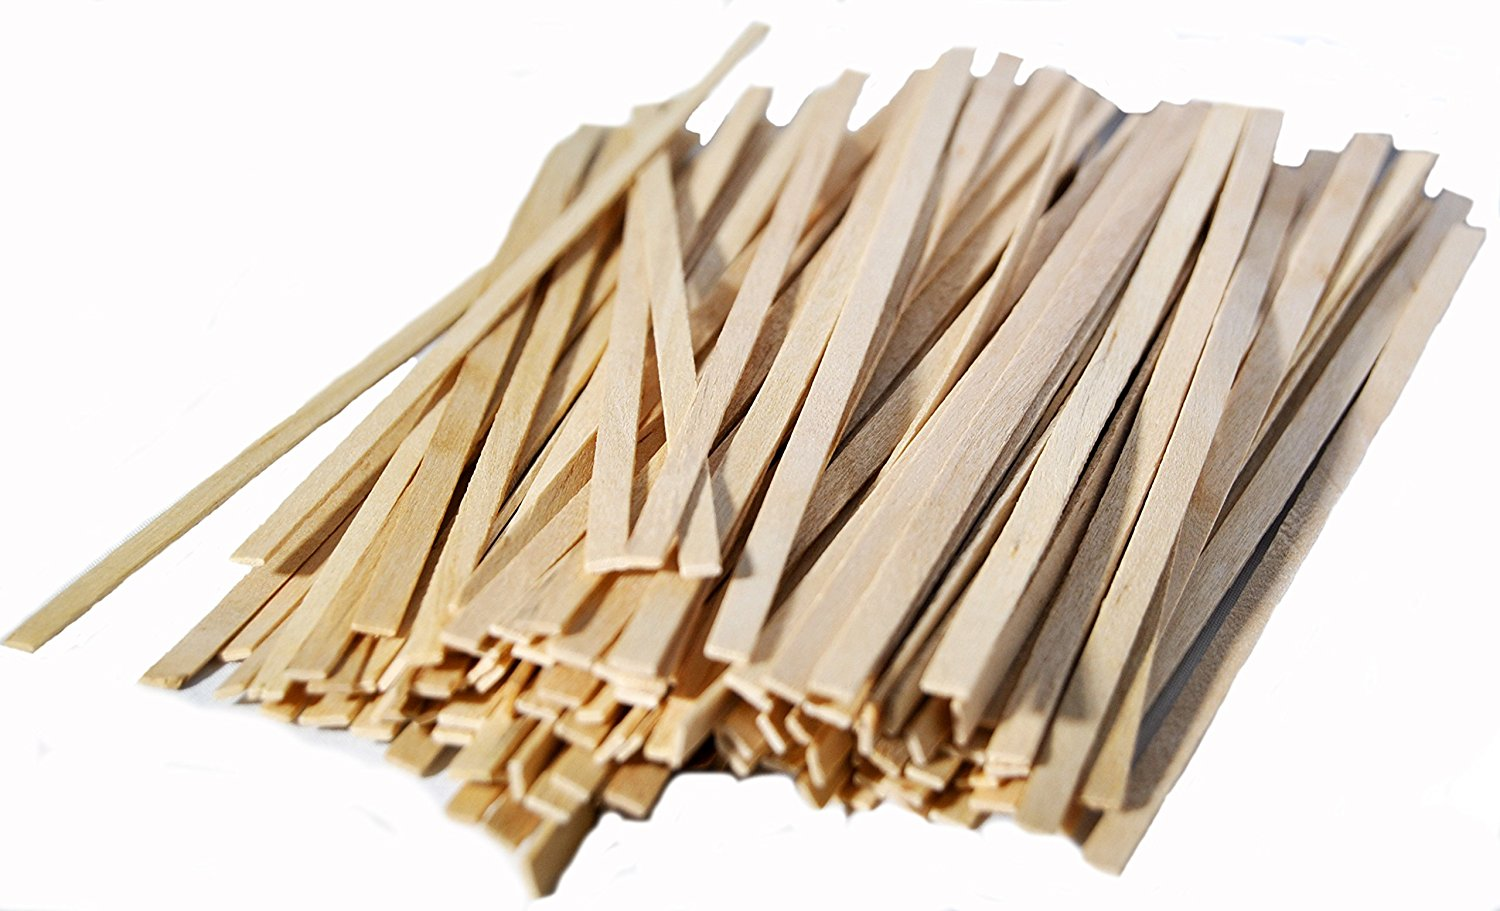 5 1/2" Coffee Stirrers with Square Ends Box of 1,000ct ( Item# FS200)